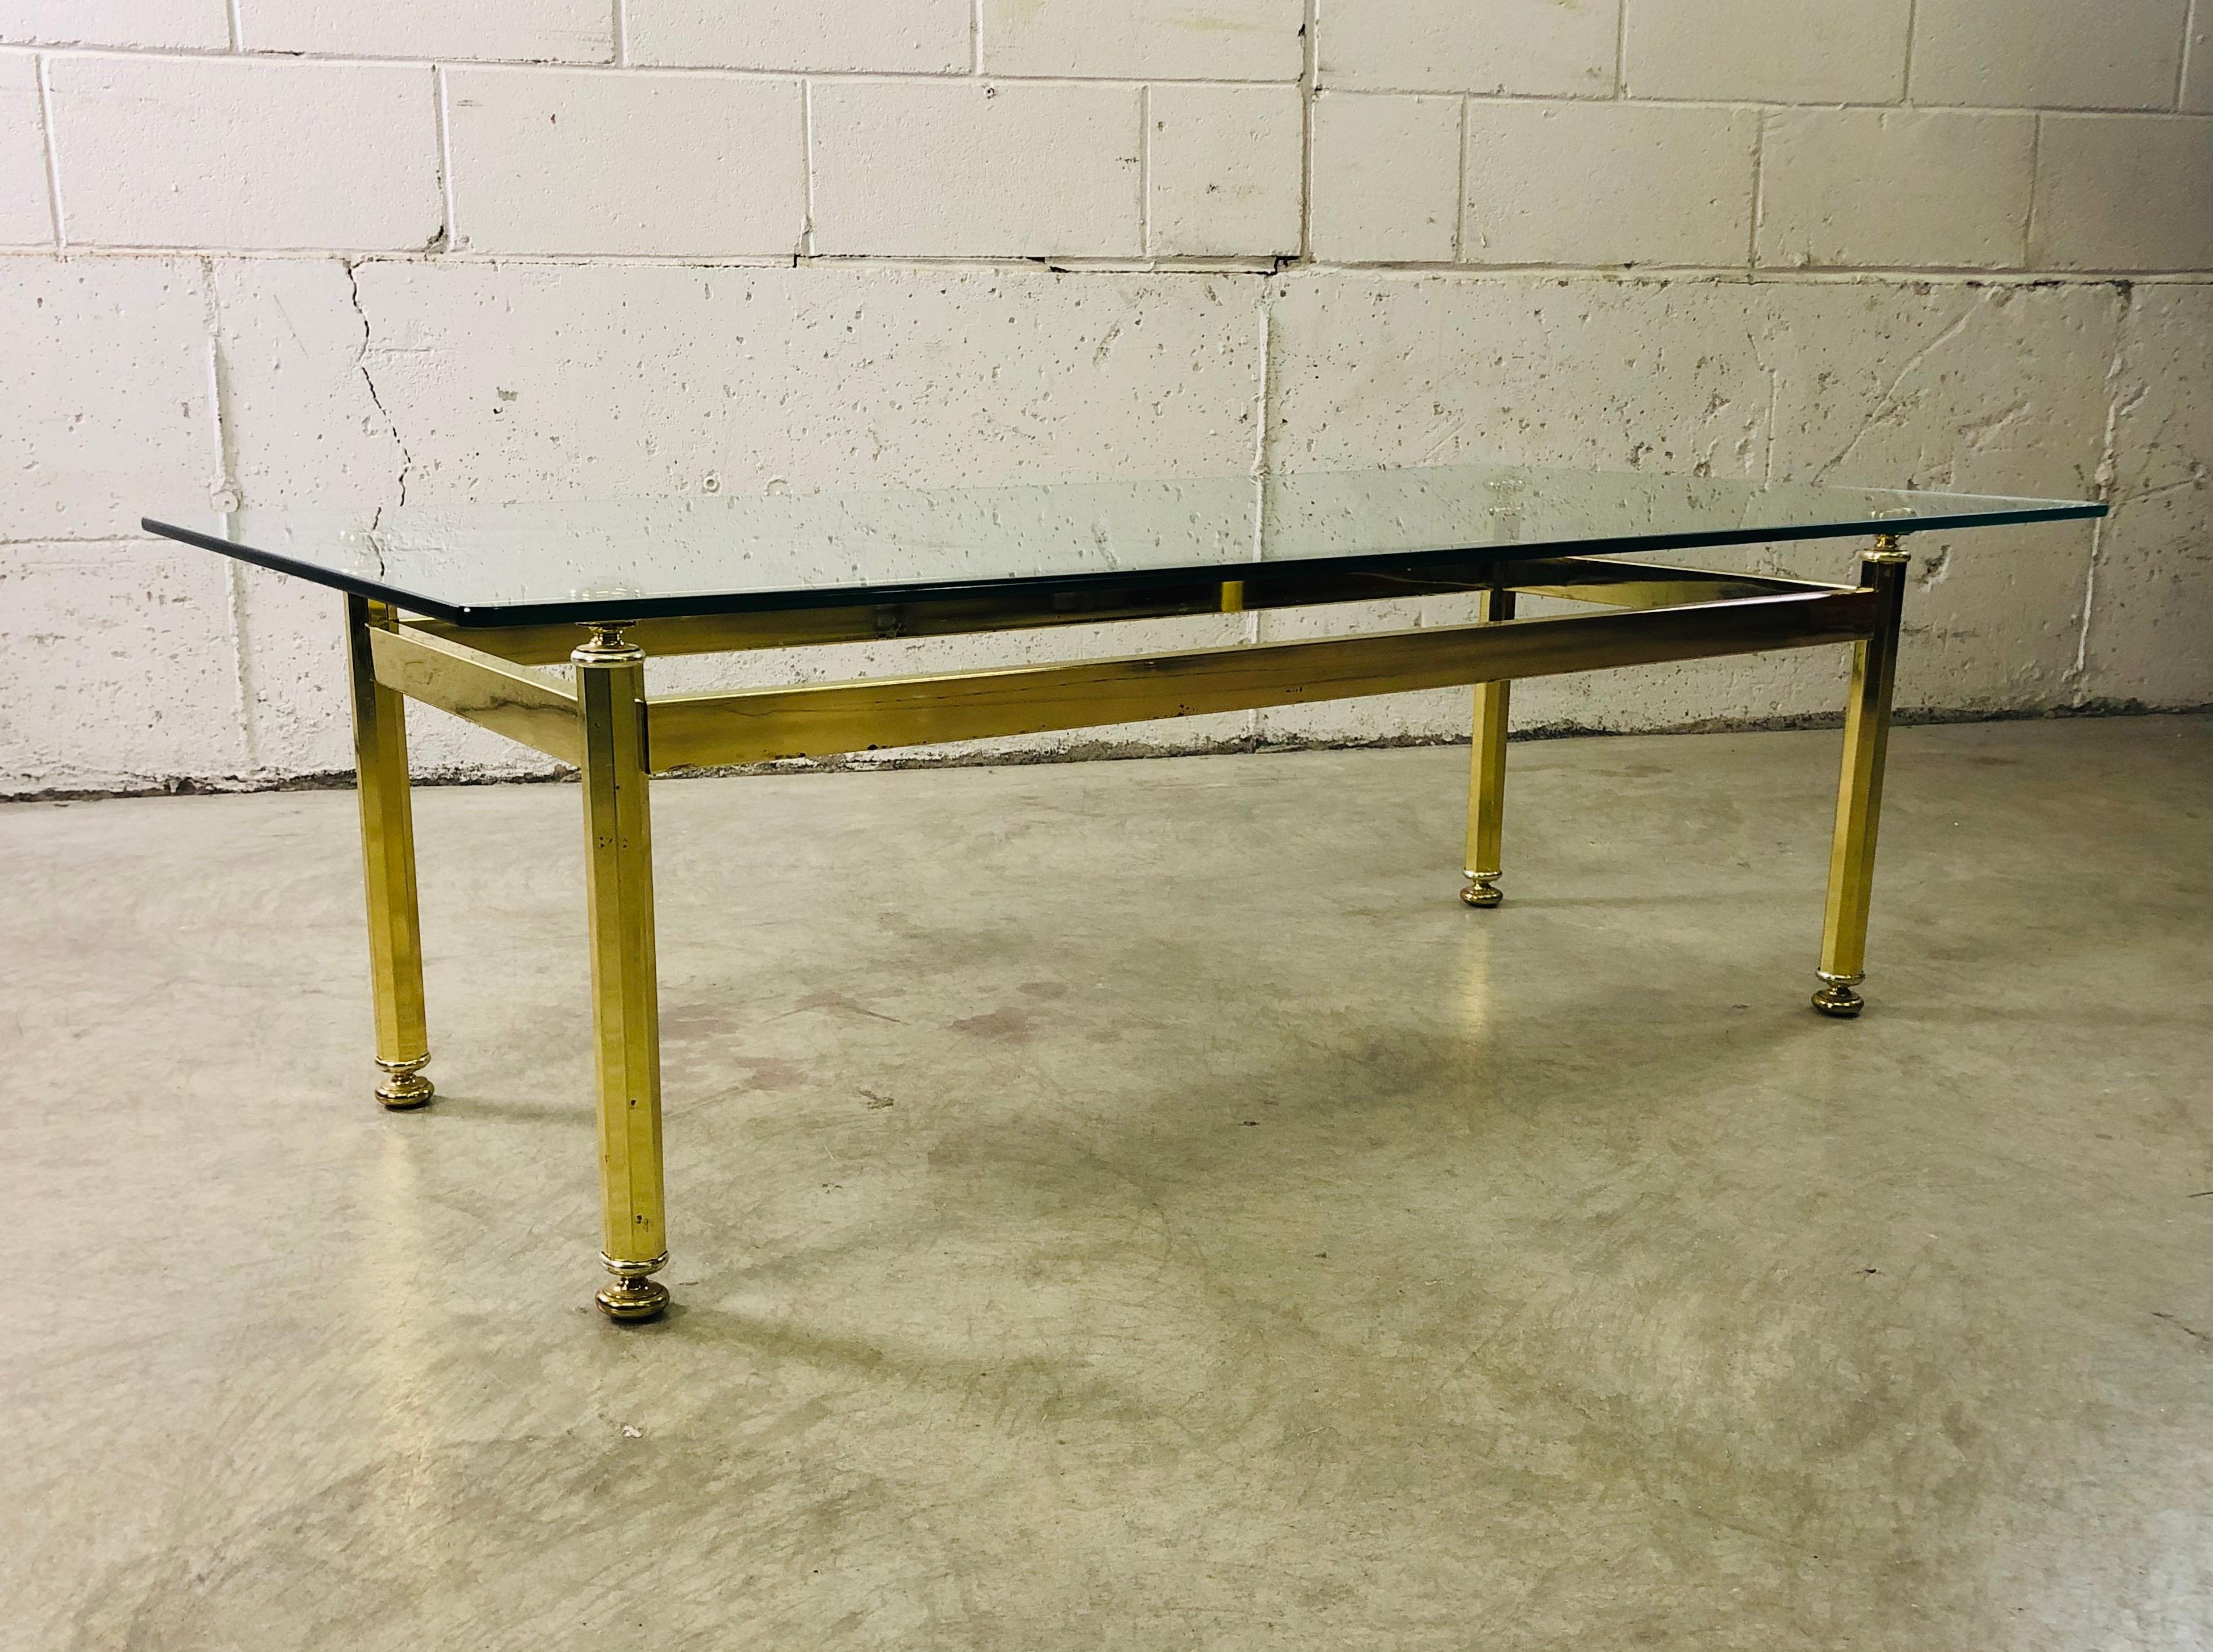 Vintage 1970s rectangular brass and glass top coffee table. Minimal wear to the glass and the table is sturdy. No marks.